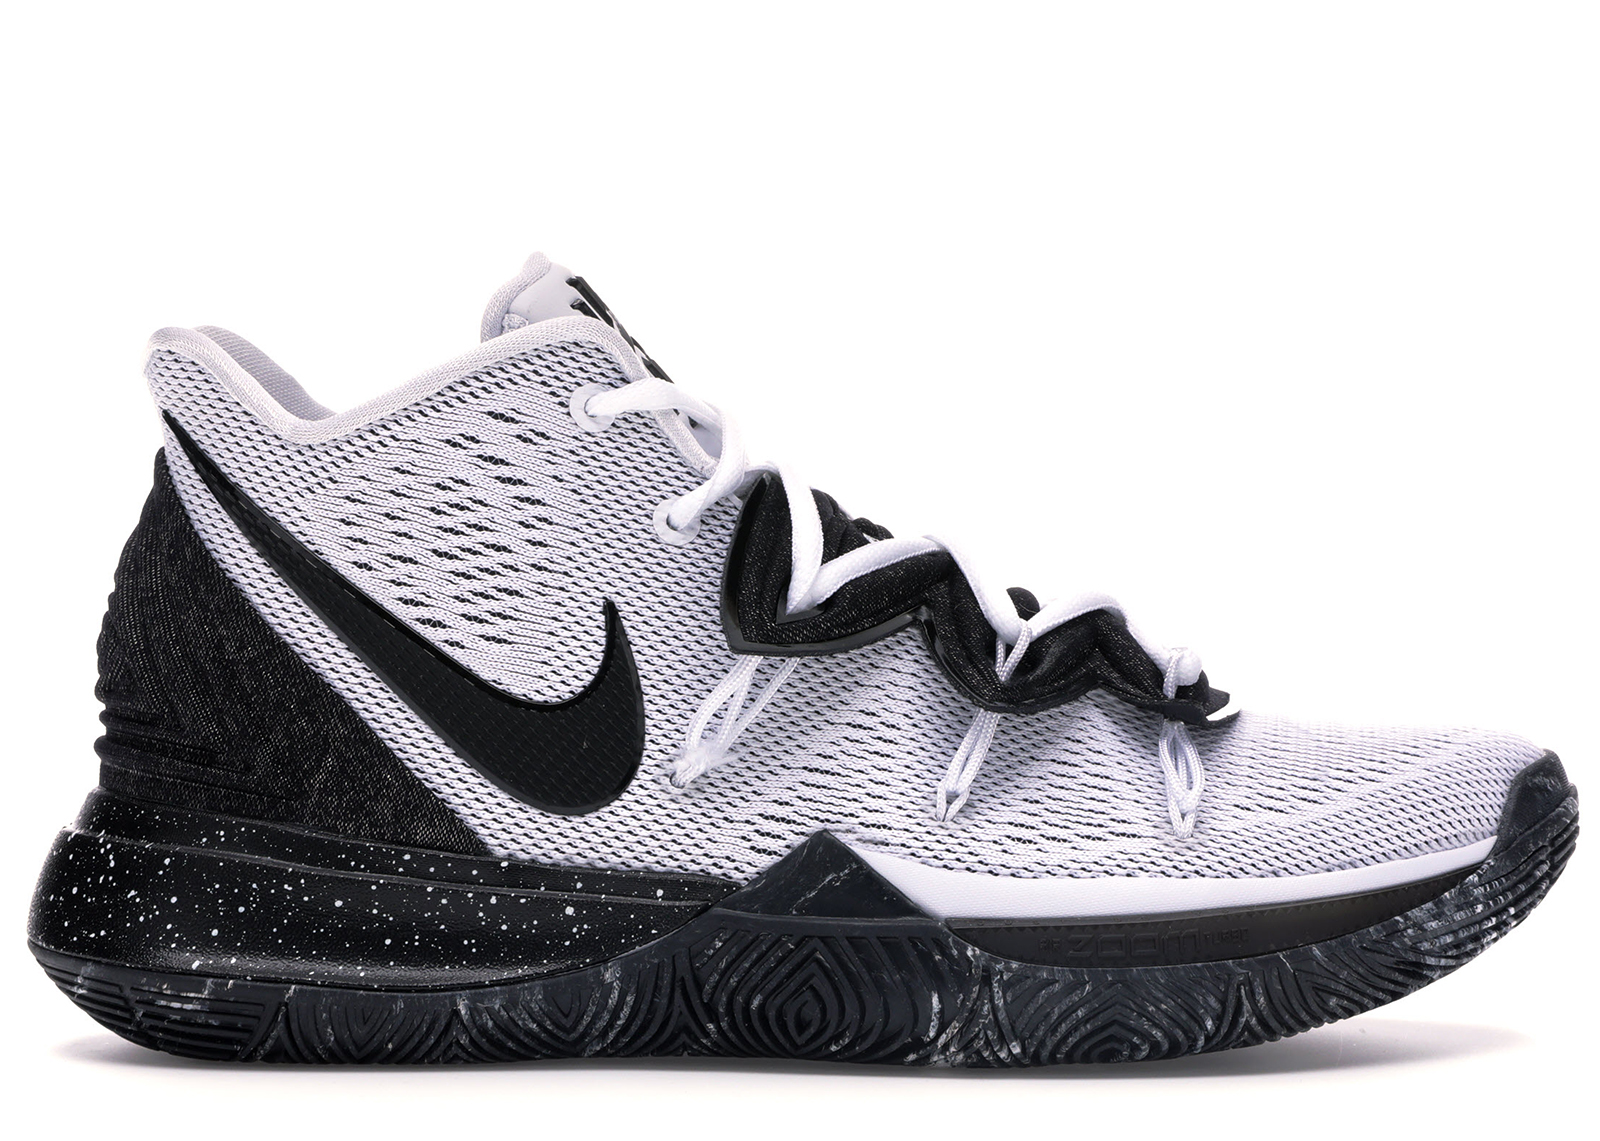 kyrie cookies and cream shoes